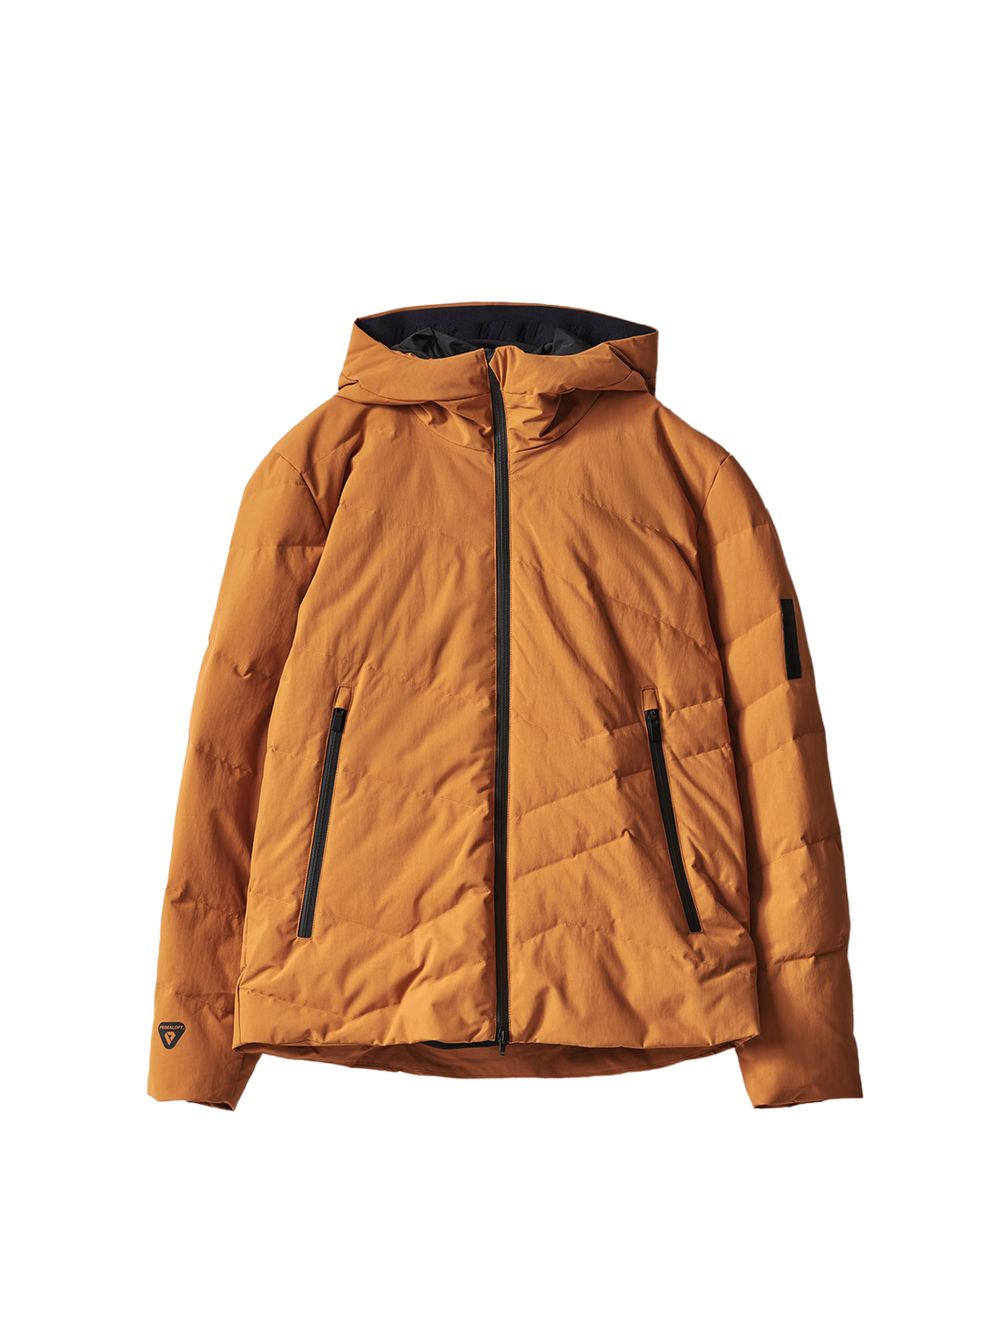 Product Image for Equip Primaloft Down Jacket